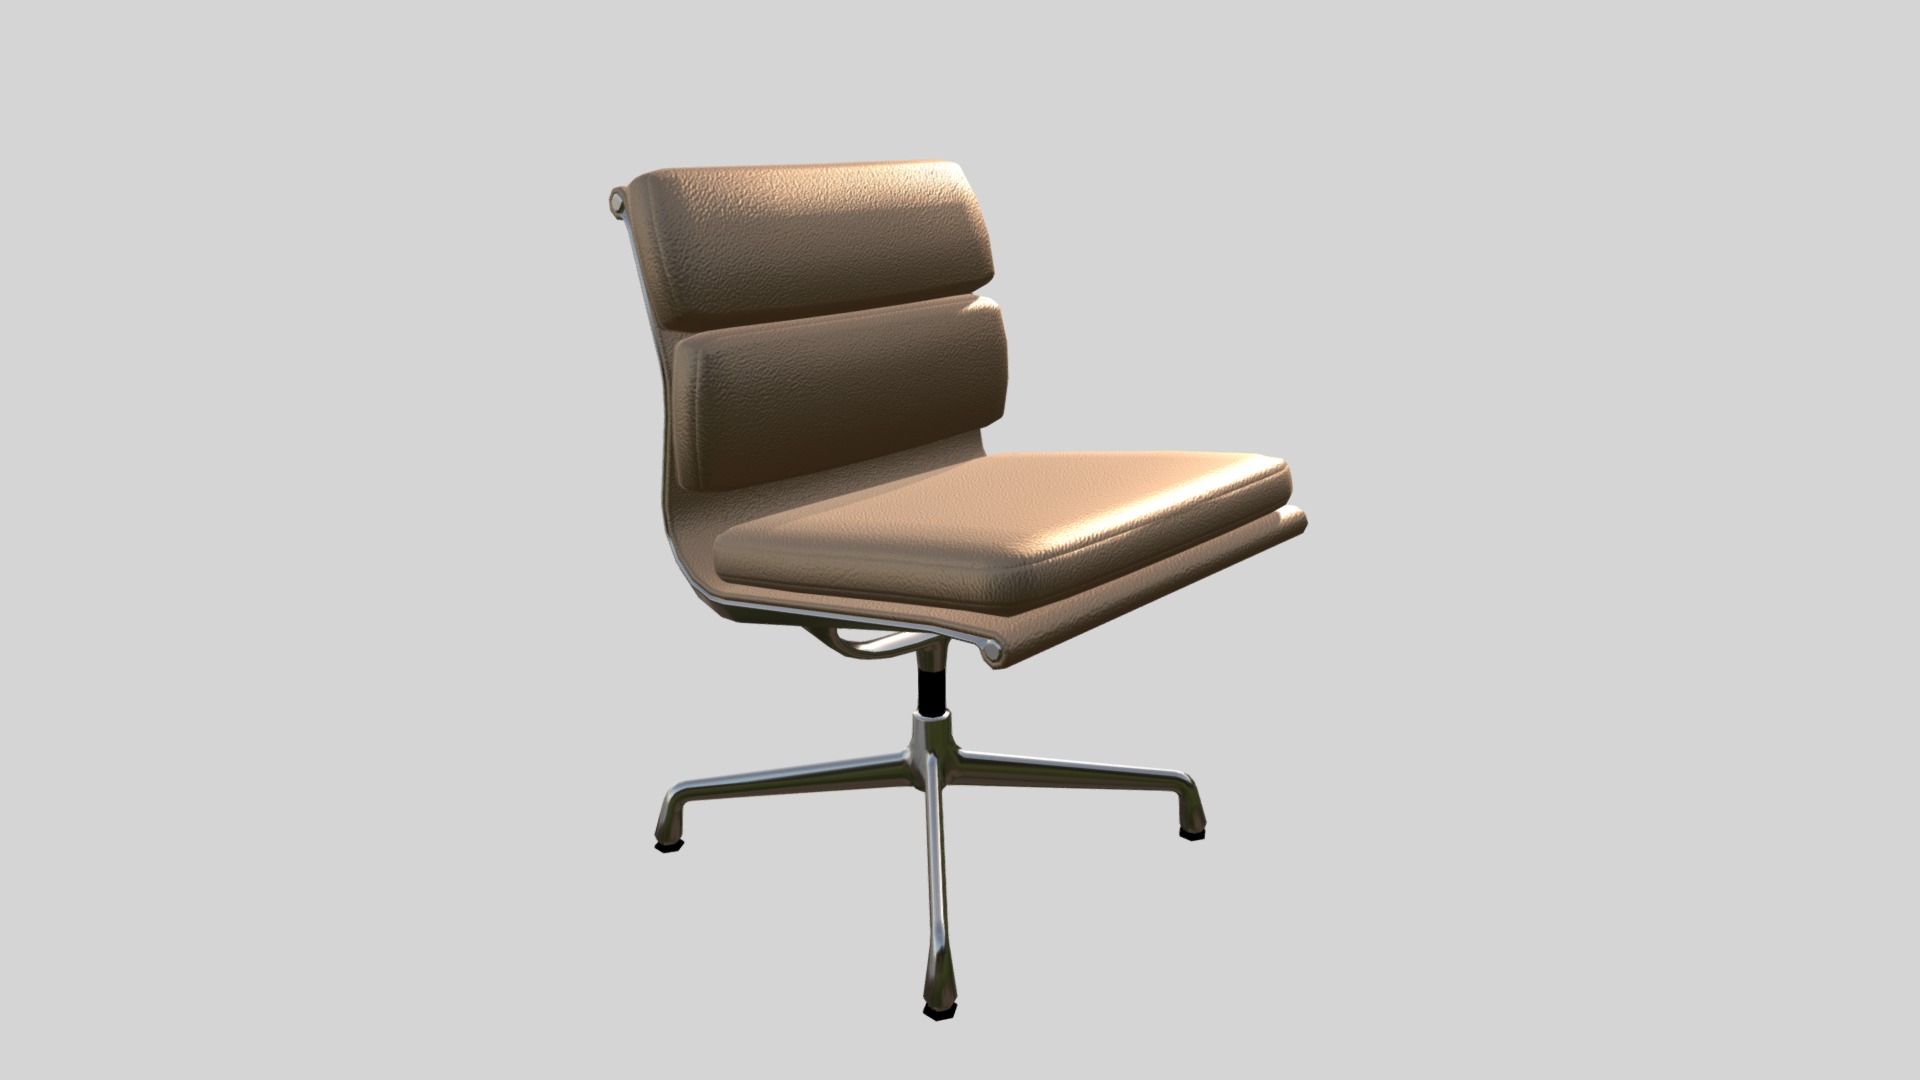 3D model Chair Vitra Soft Pad Chairs - This is a 3D model of the Chair Vitra Soft Pad Chairs. The 3D model is about a brown chair with a cushion.